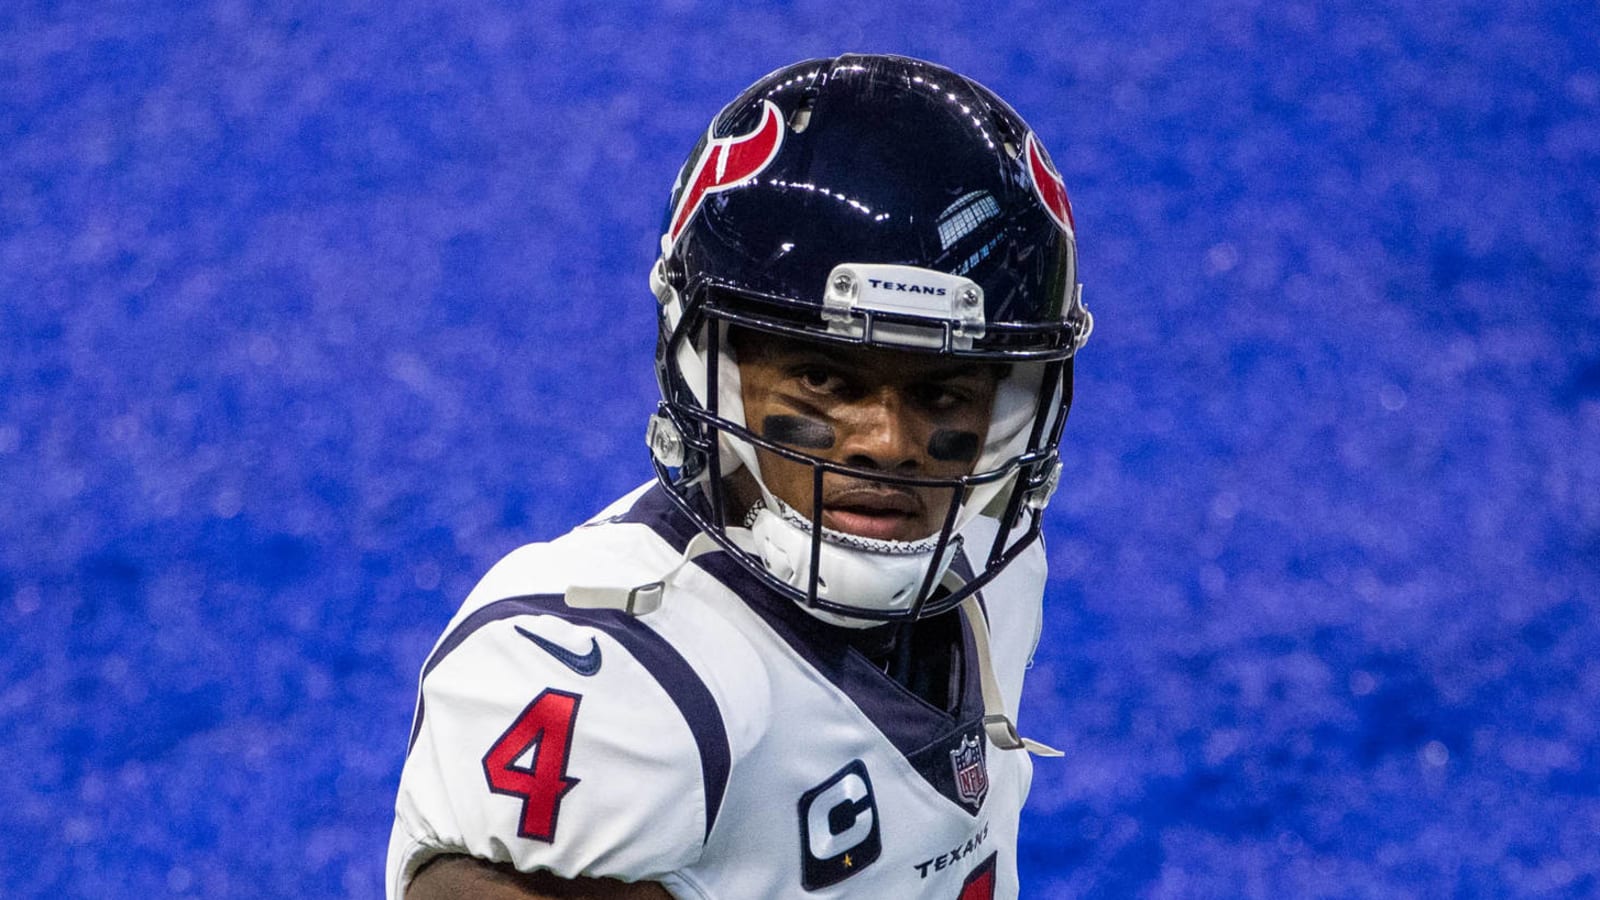 Texans owner doesn't 'have anything new' on Watson amid lawsuits